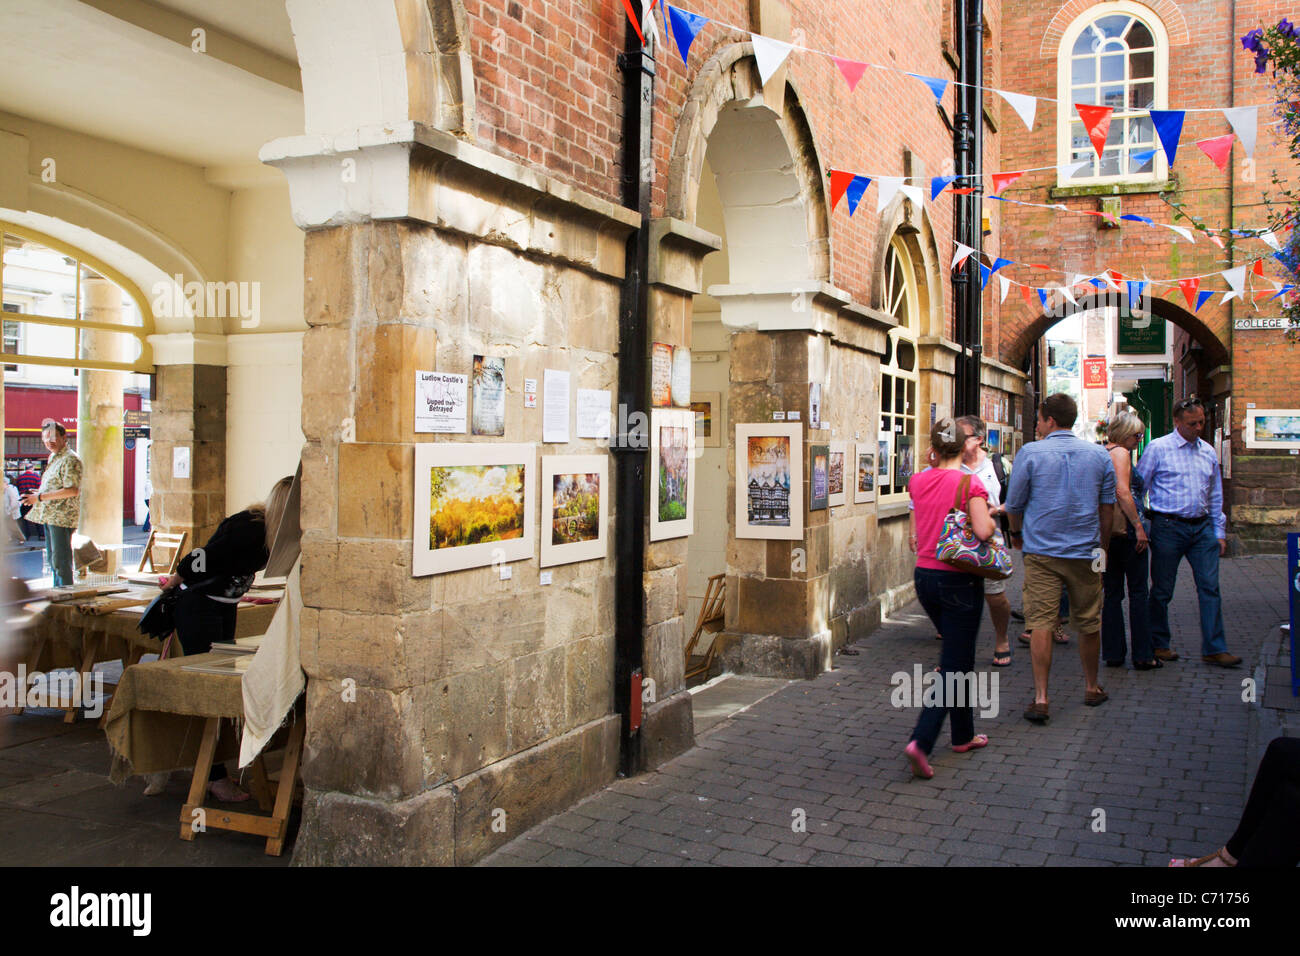 Art Display at The Buttercross Ludlow Shropshire England Stock Photo